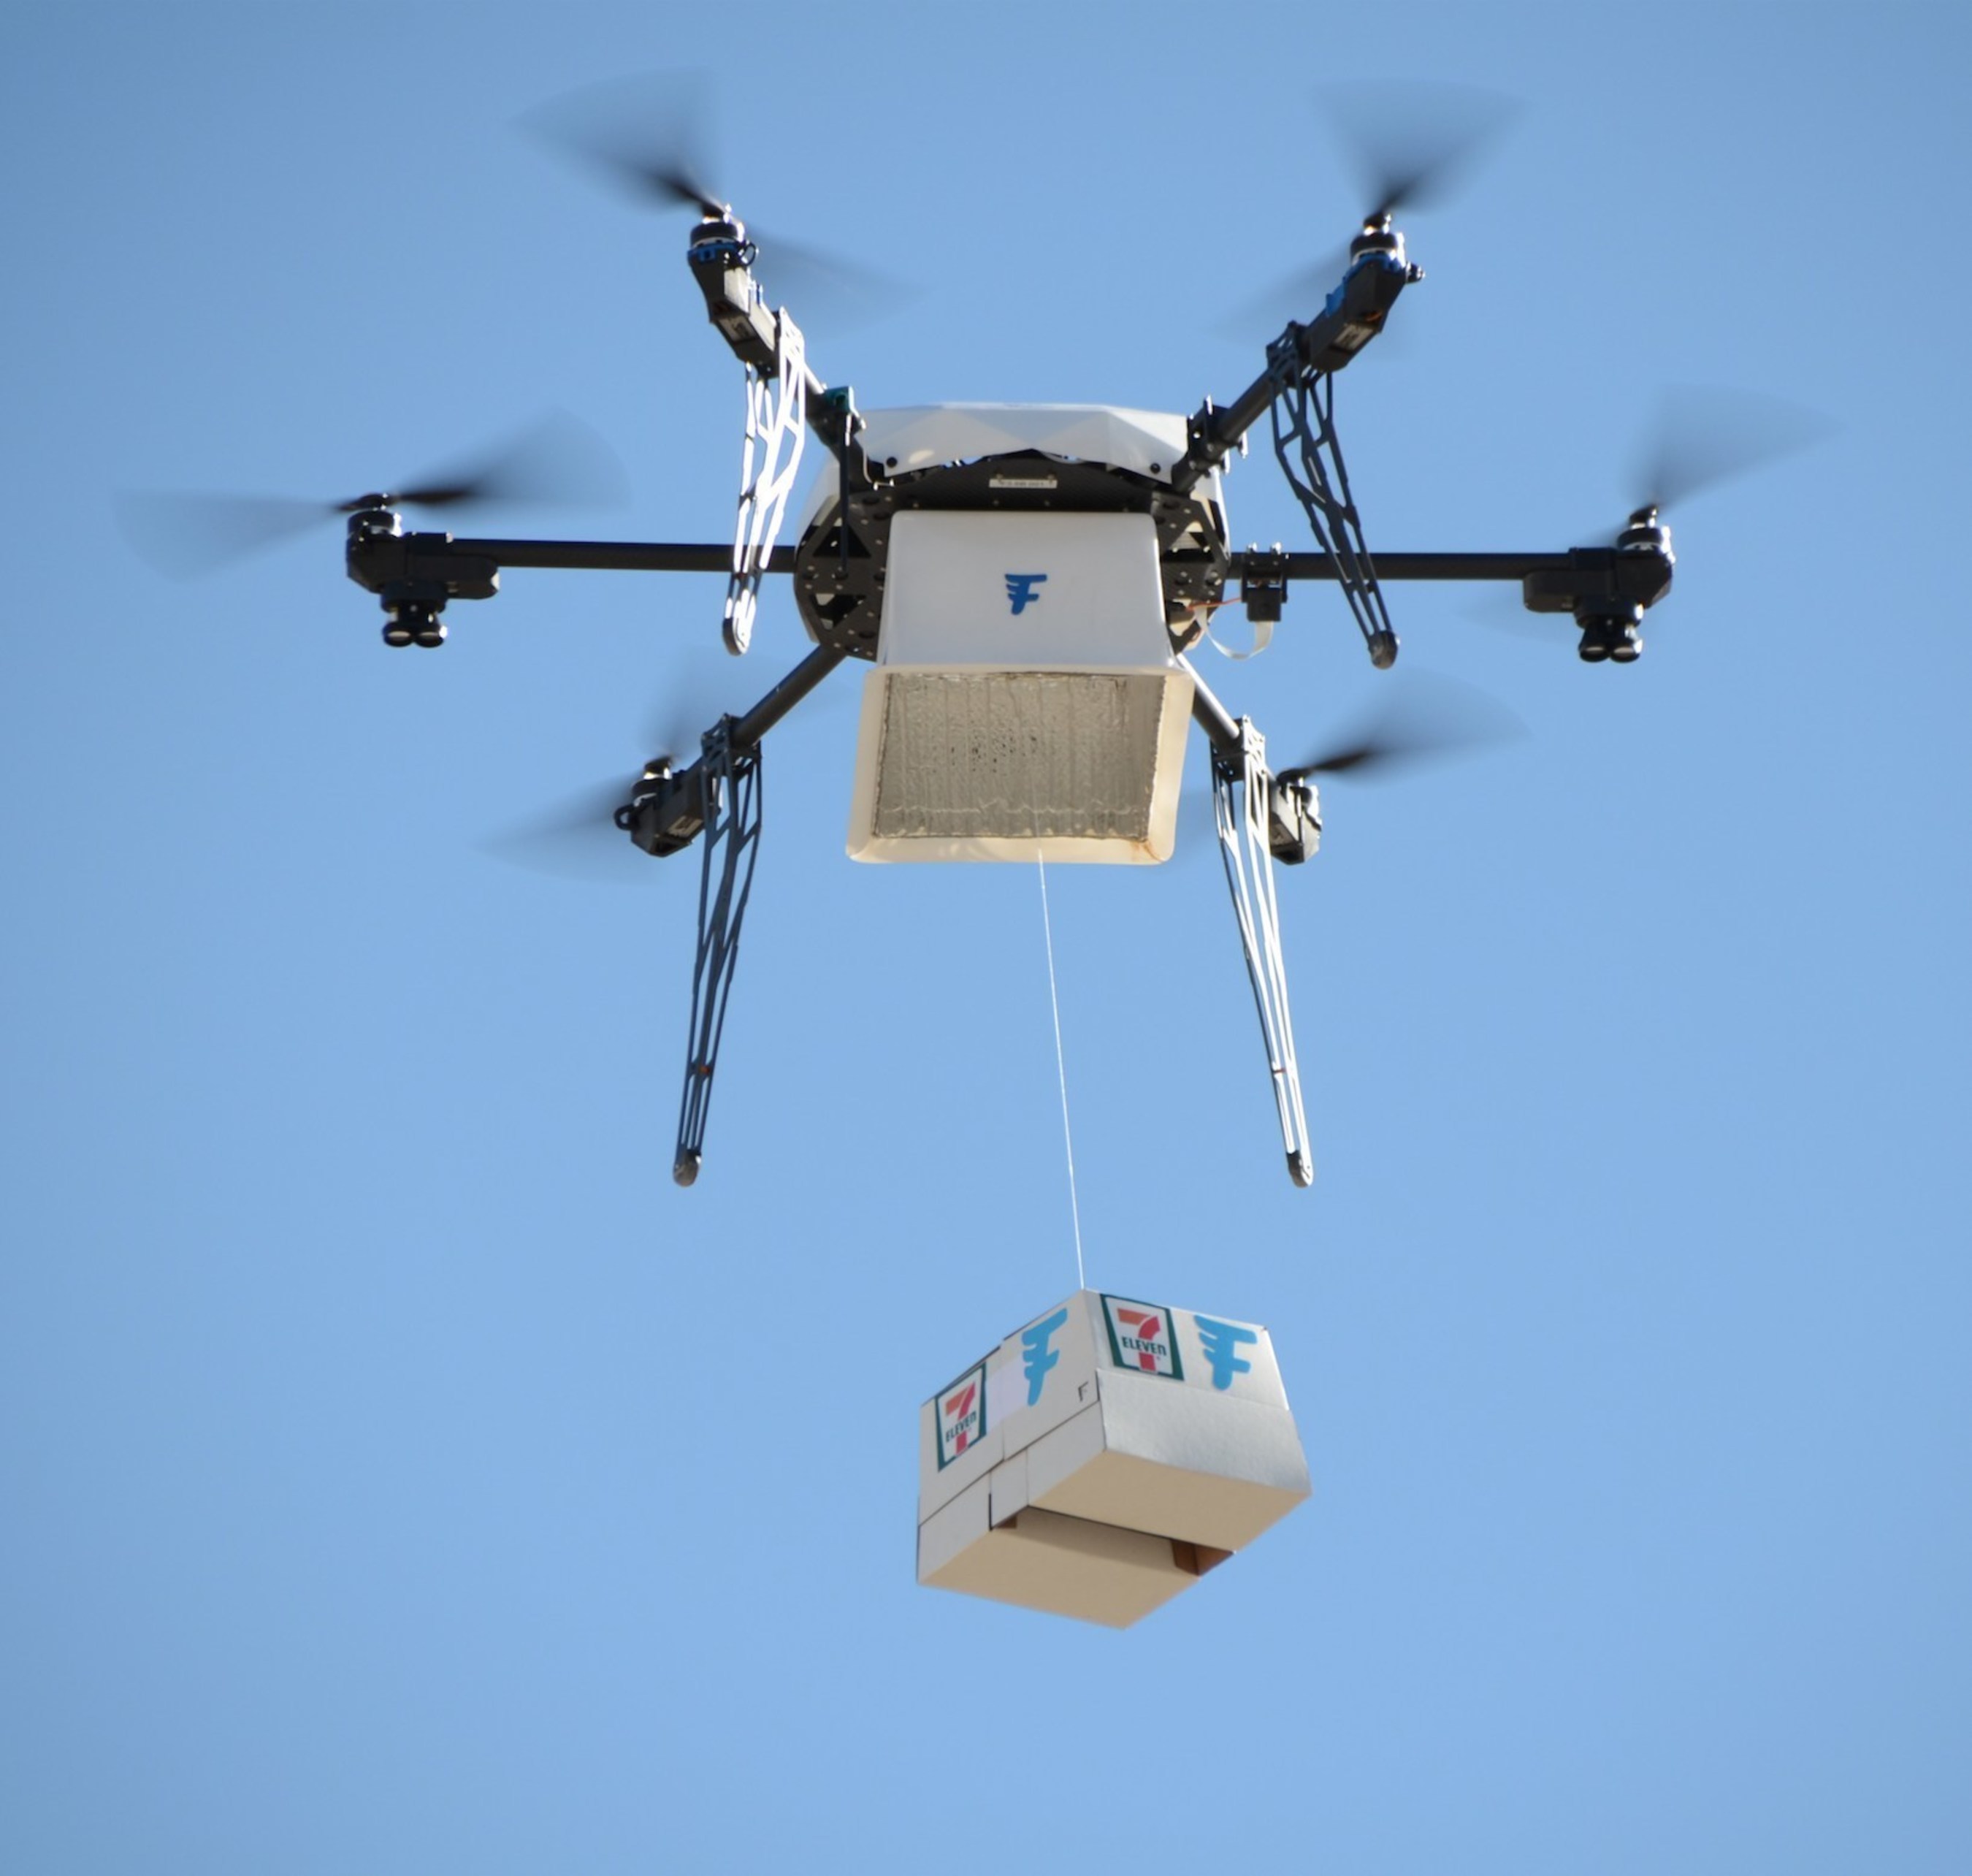 7-Eleven and Flirtey have completed the first fully autonomous drone delivery to a customer's residence